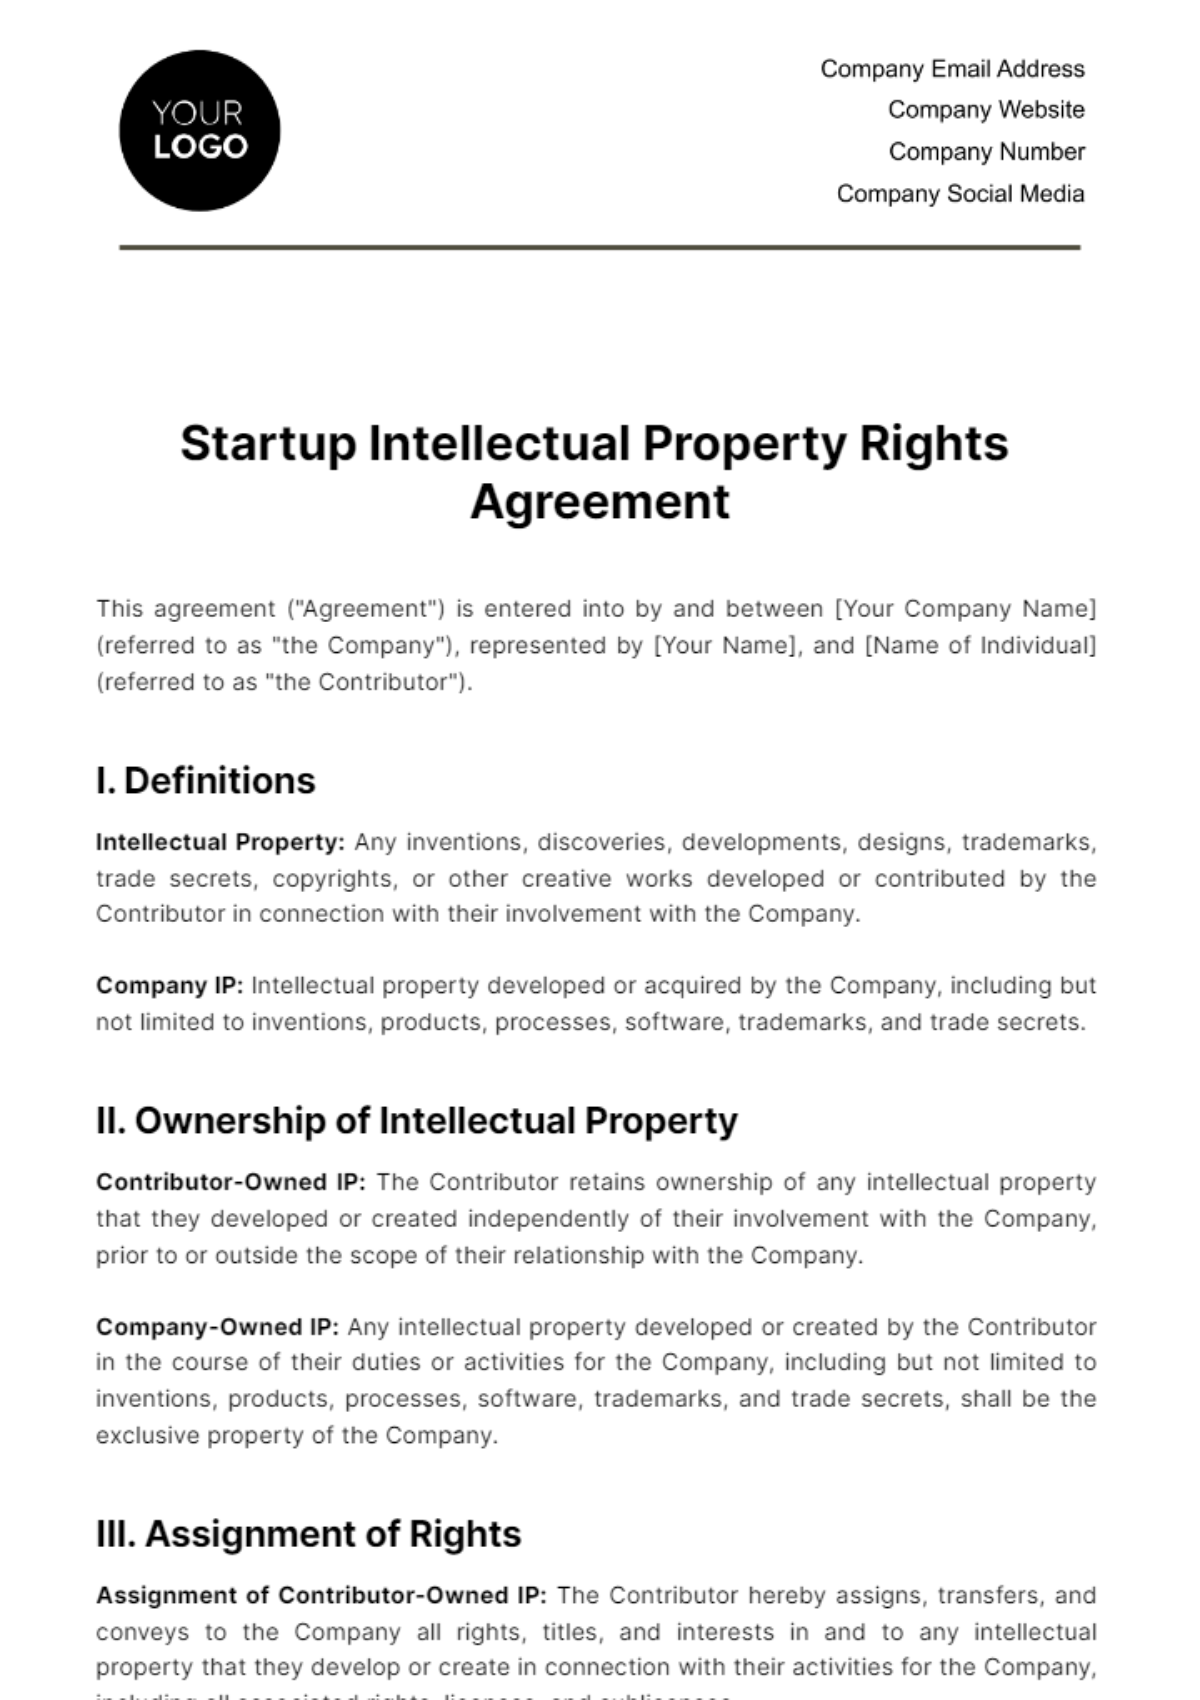 Free Startup Intellectual Property Rights Agreement Template